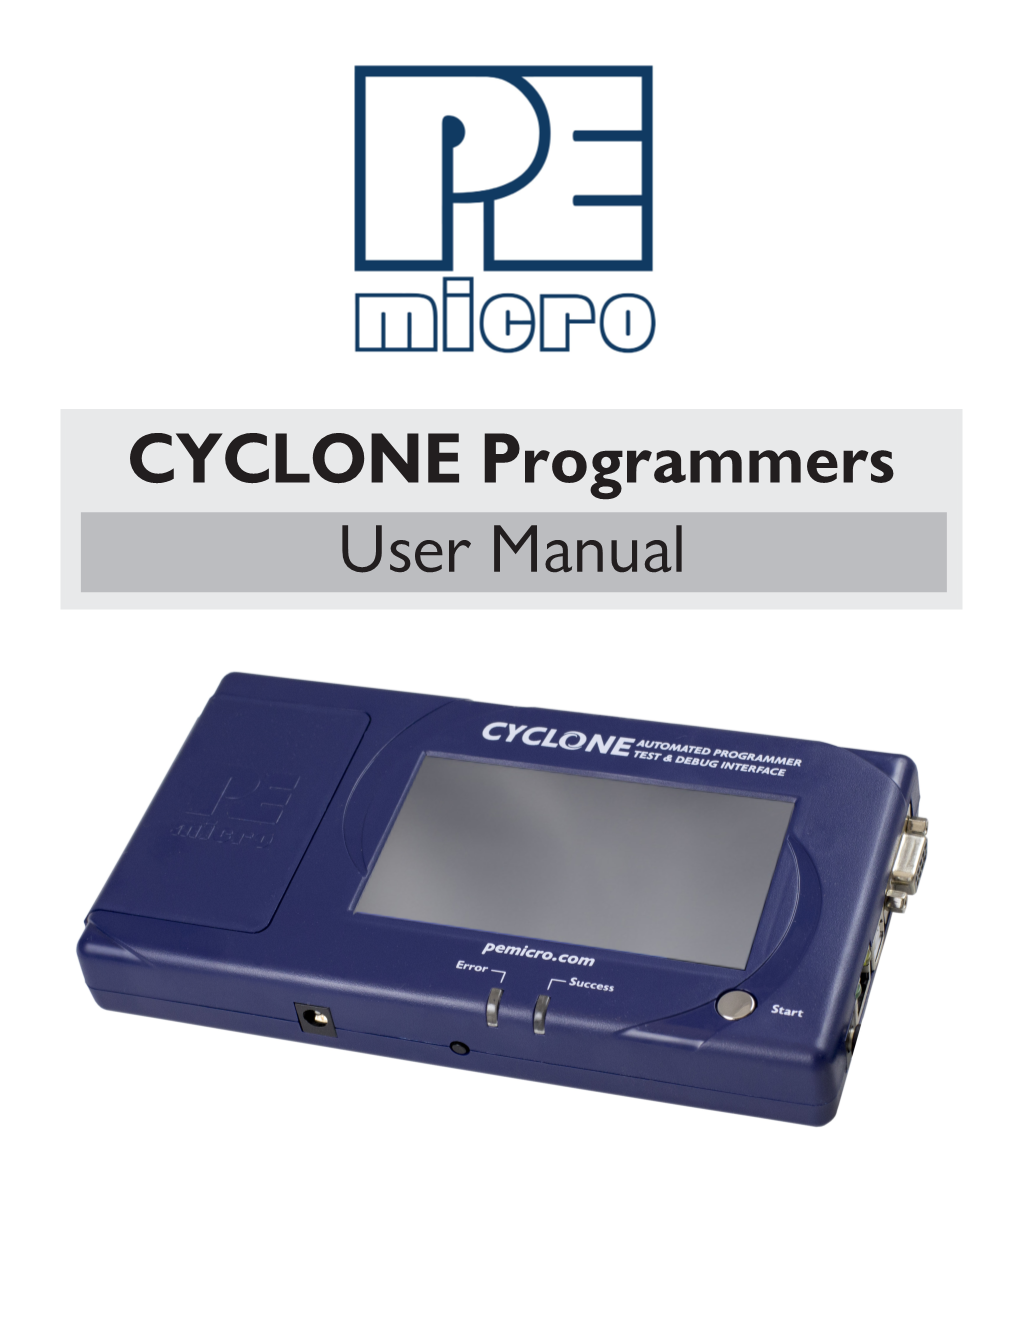 CYCLONE Programmers User Manual Purchase Agreement